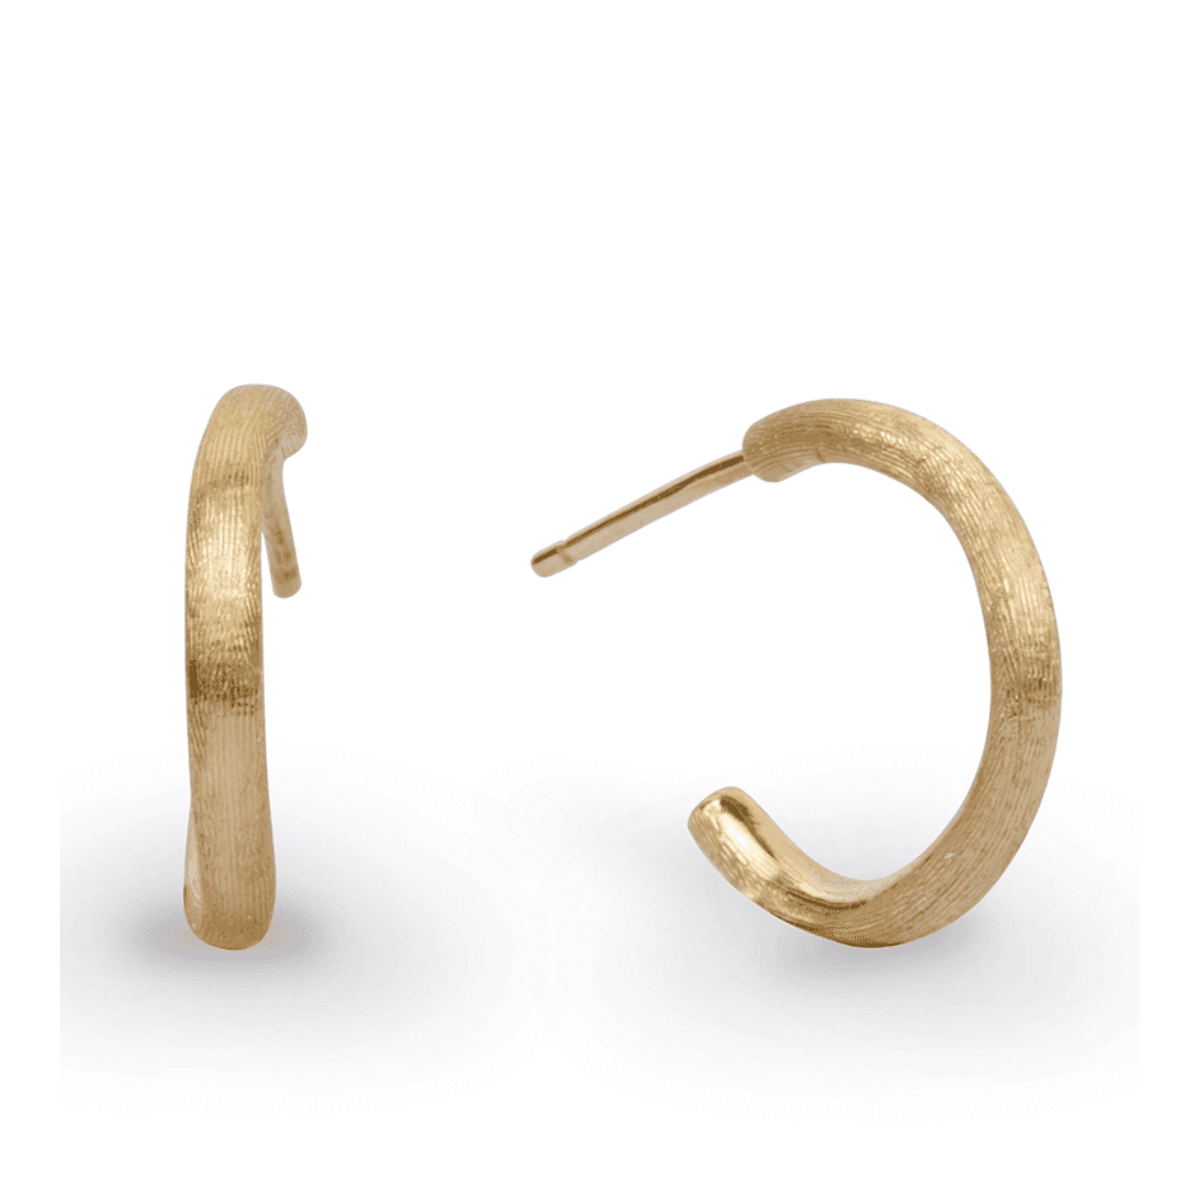 Marco Bicego Jaipur Collection 18K Yellow Gold Small Hoop Earrings